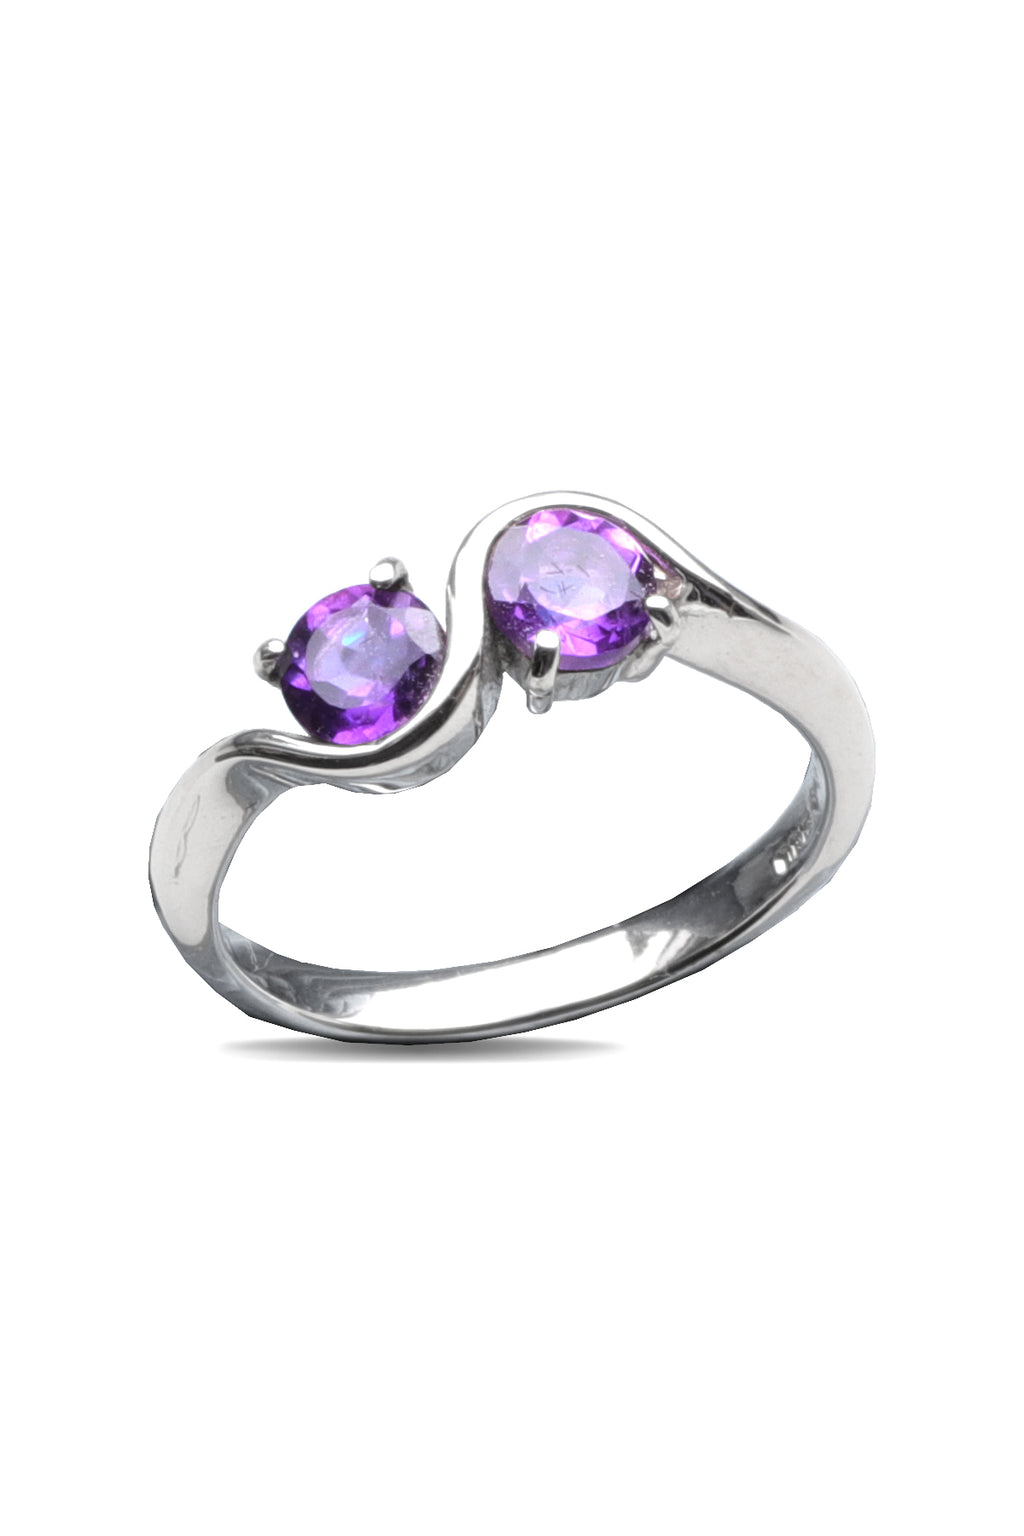 Twin Amethyst Stones White Gold Ring